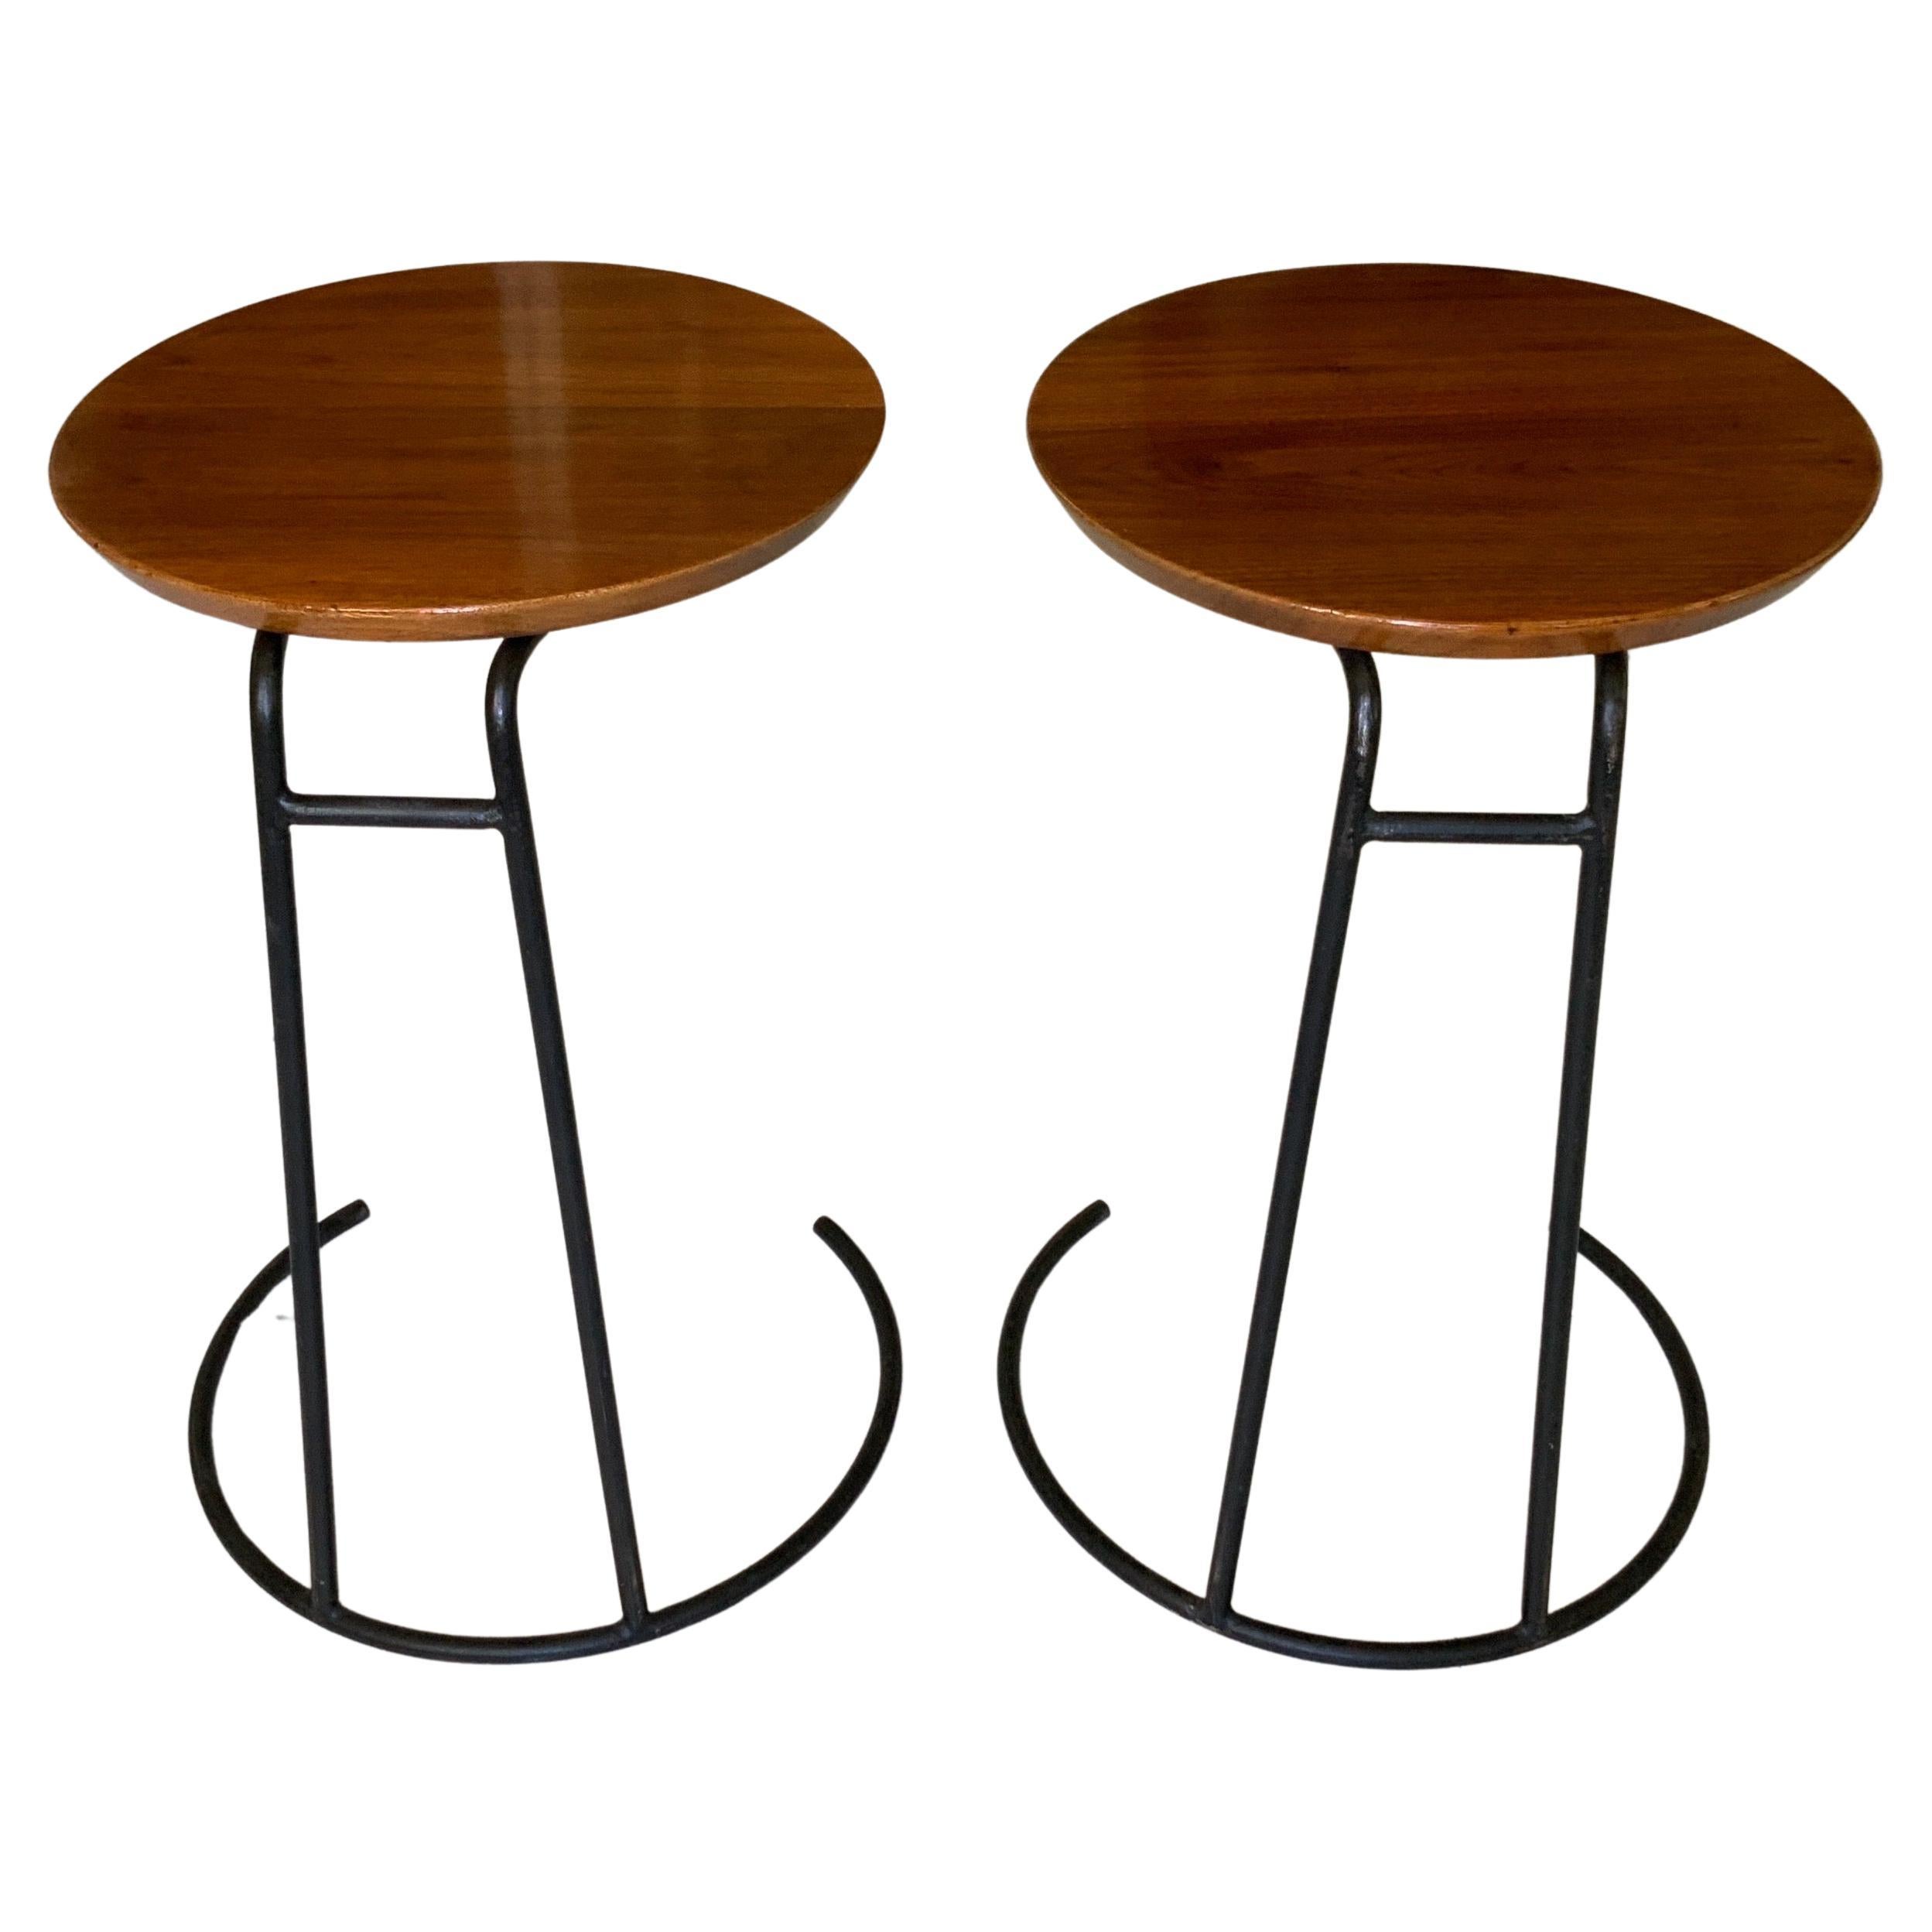 A pair of vintage original uncommon Model T710 walnut wood and lacquered steel from Danish American designer Jens Risom. This set of stackable side tables, circa 1950 have their original labels as well as original rubber bumpers in very good shape.